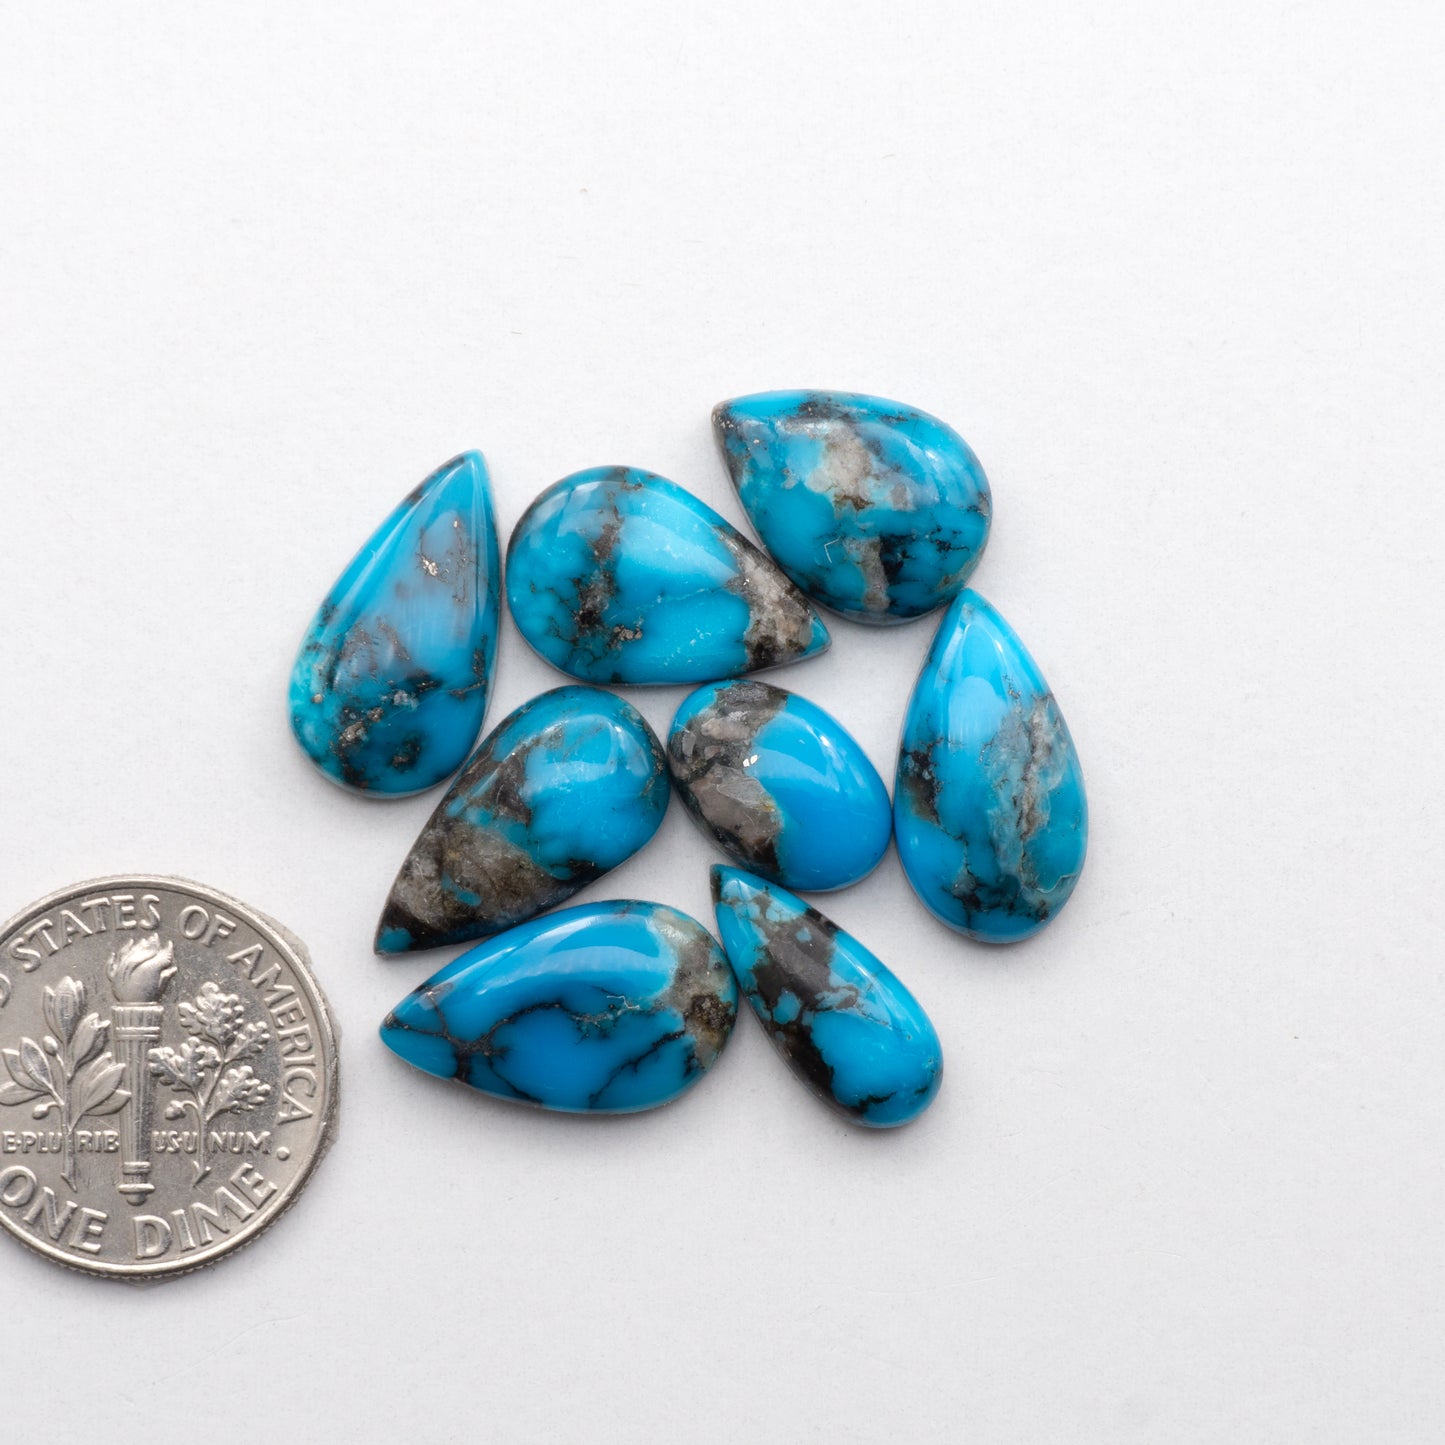 Experience the beauty of the Turquoise Mountain with our stunning Turquoise Mountain cabochons.